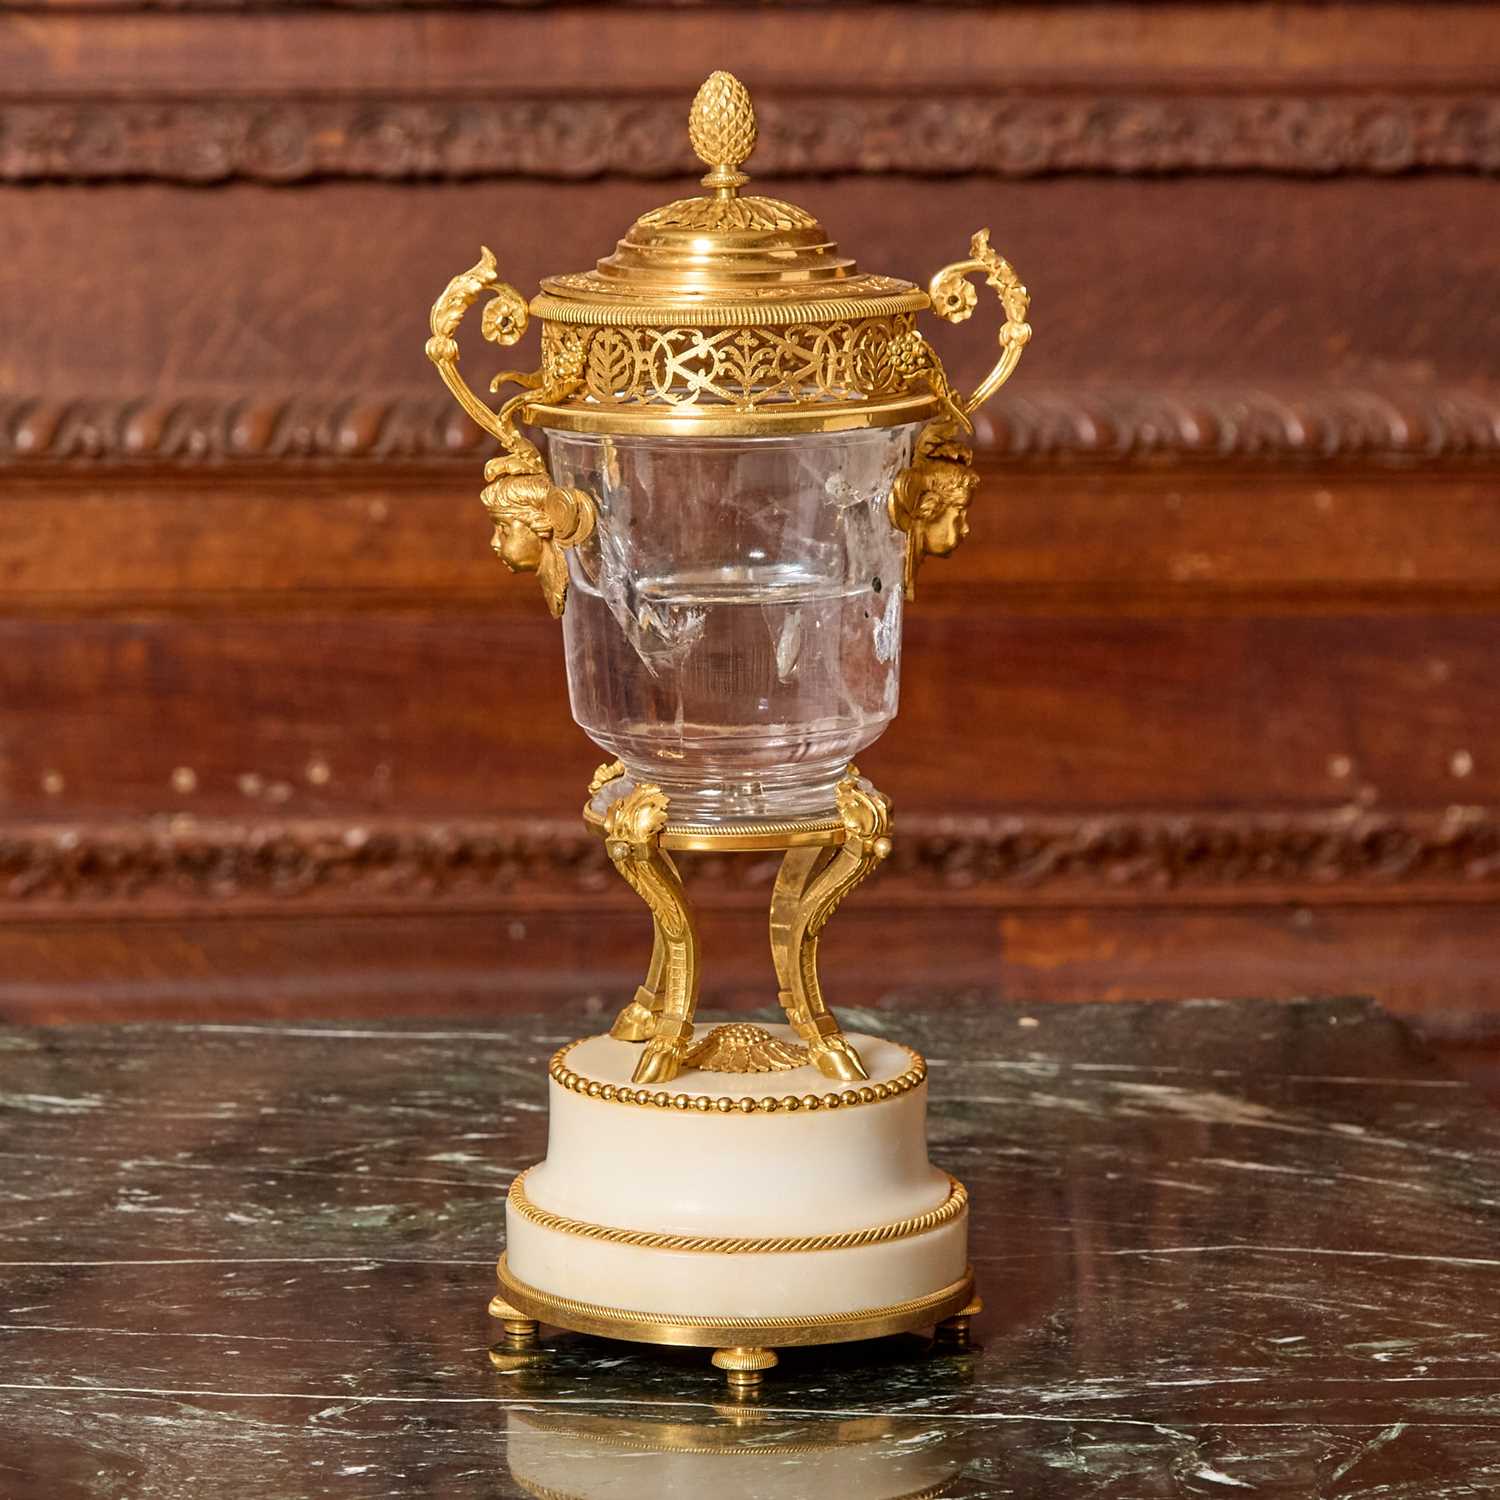 Lot 286 - Louis XVI Gilt-Bronze and Rock Crystal Covered Jar